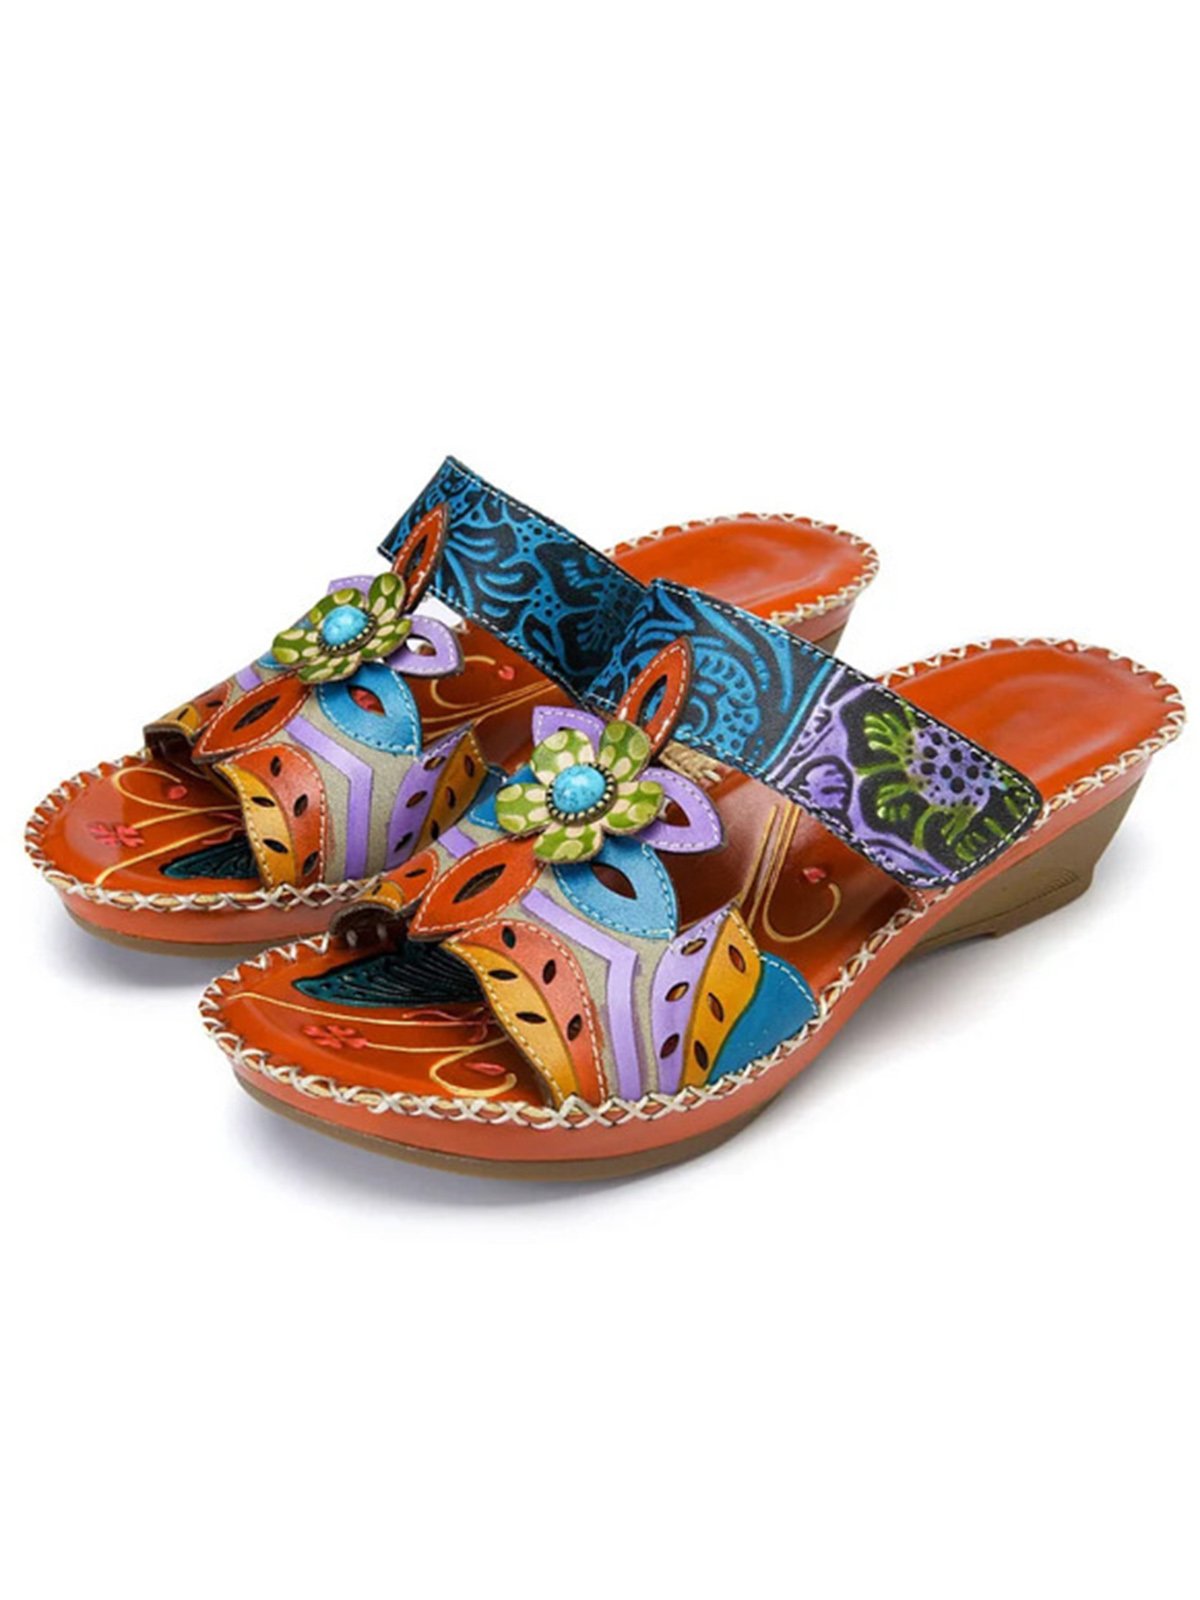 Retro Color Contrast Ethnic Style Flower Hollow Wedge Sandals